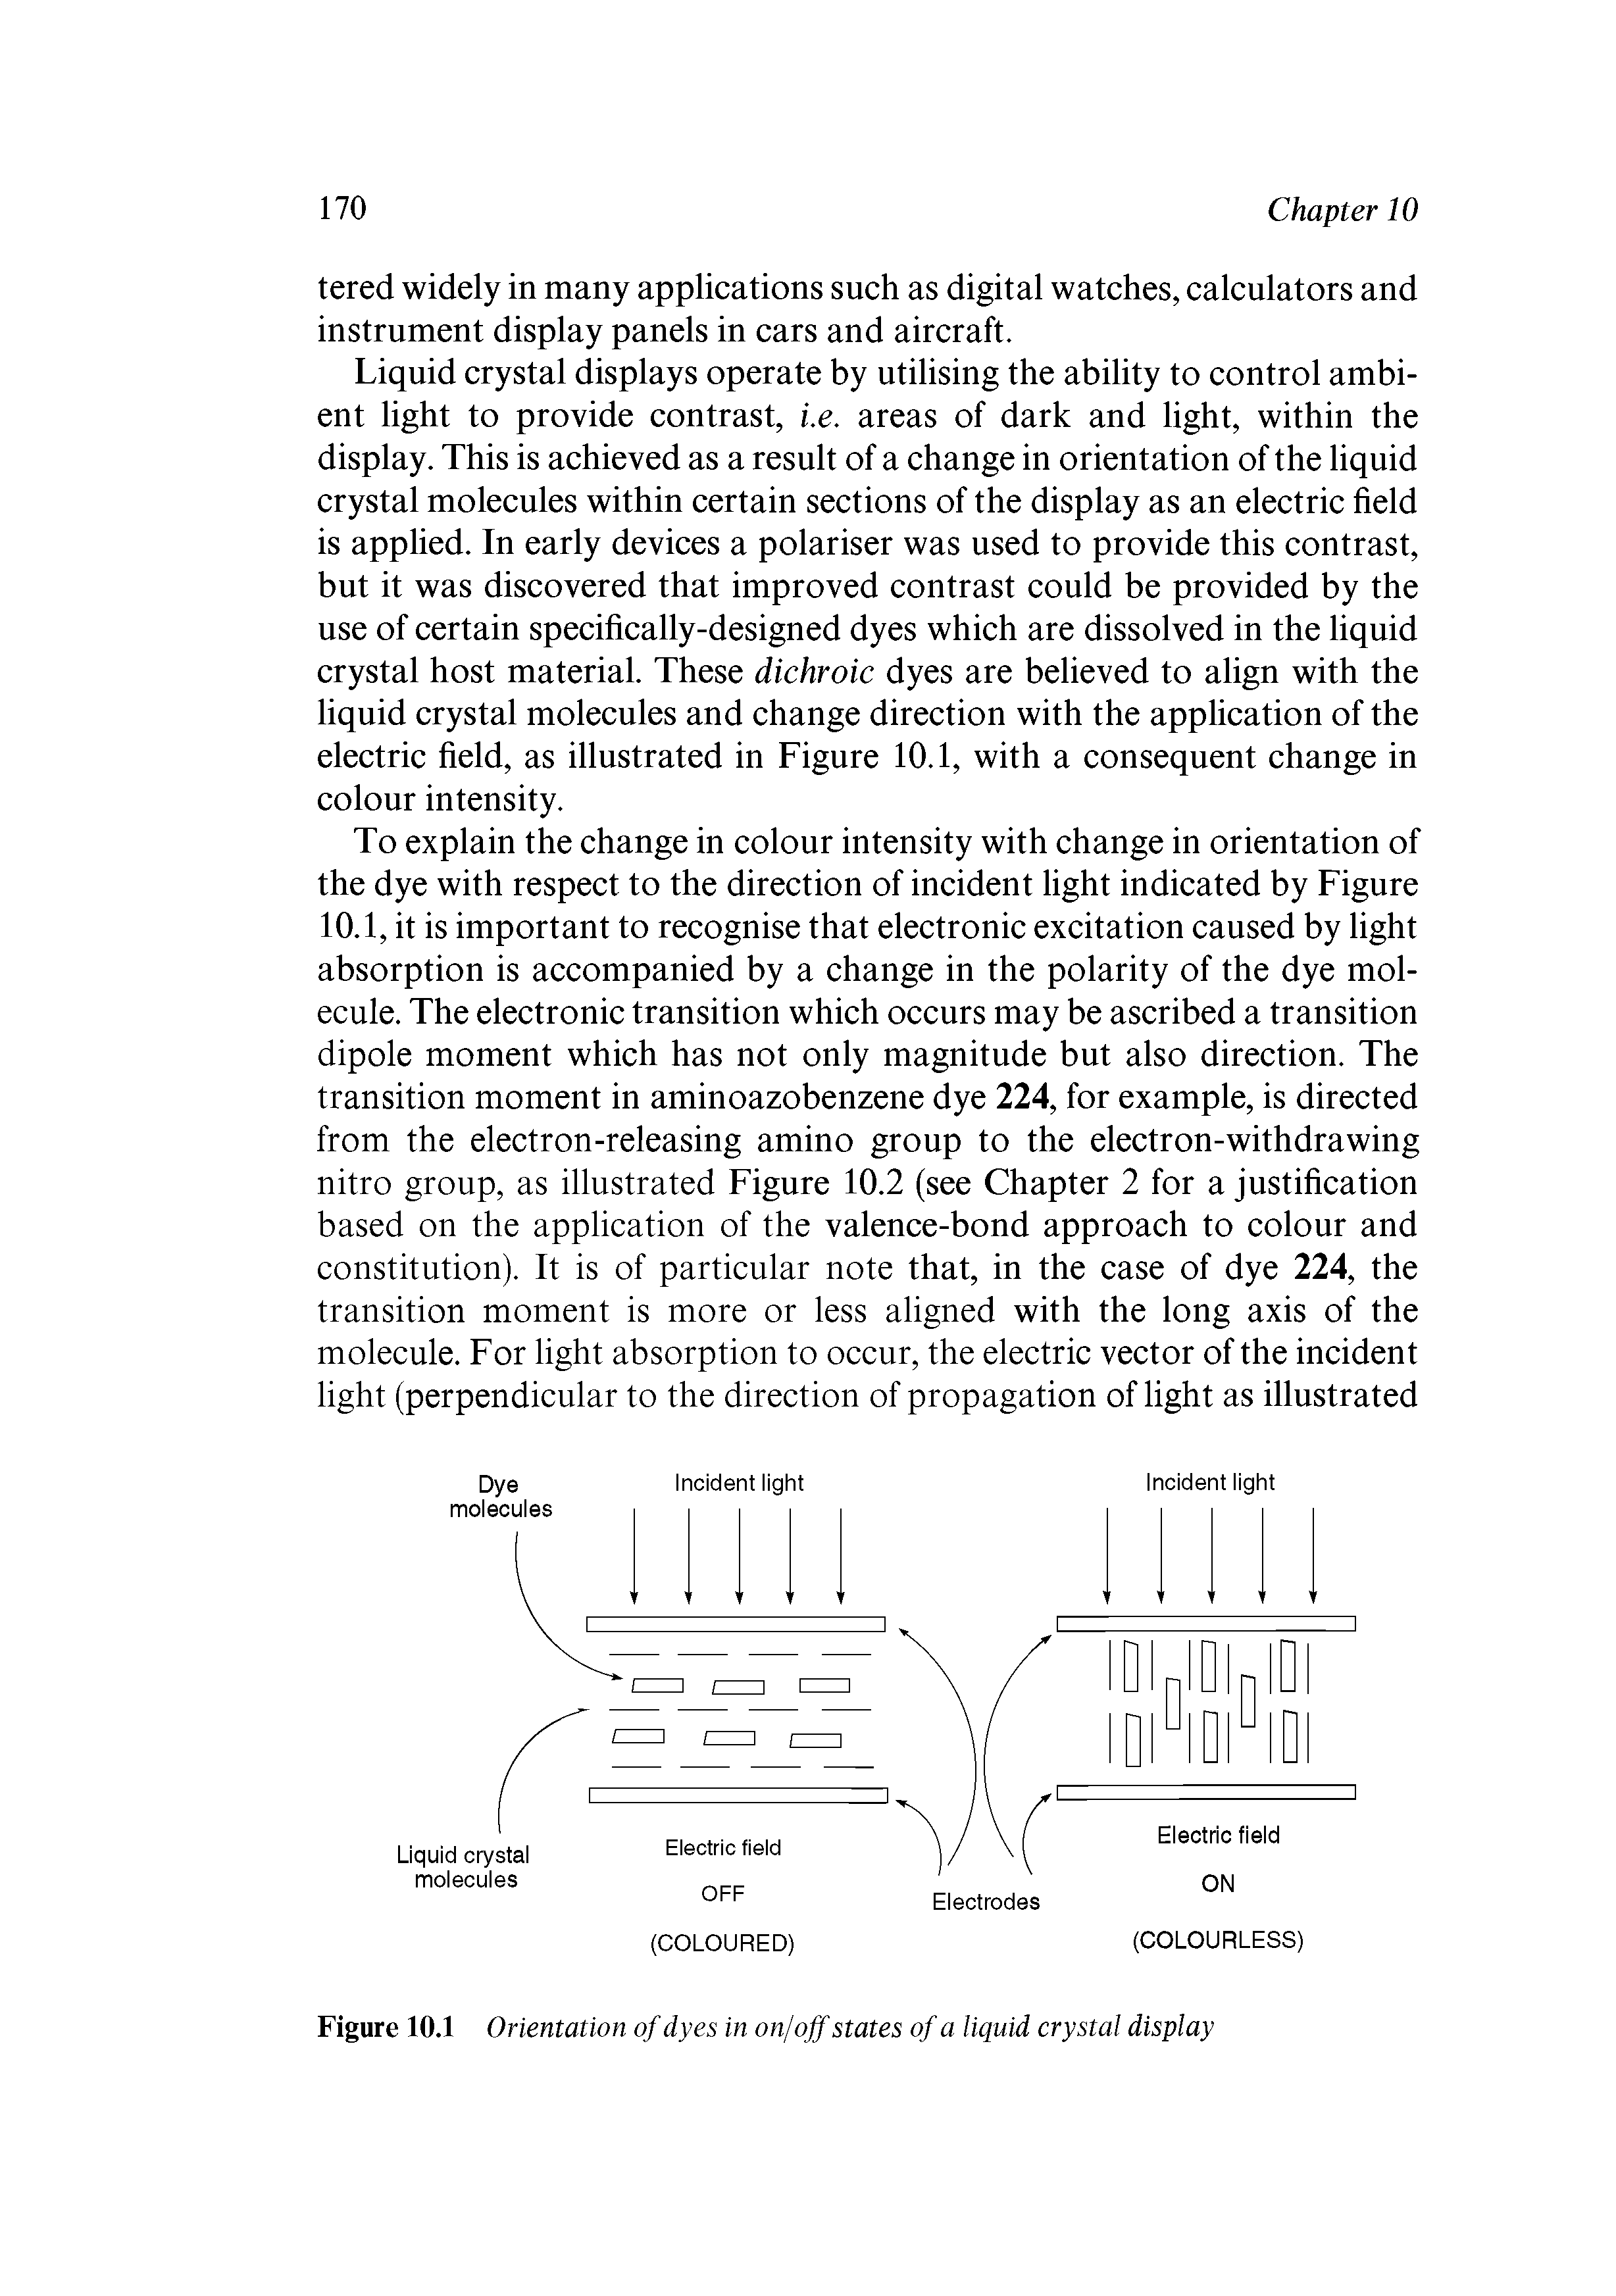 Figure 10.1 Orientation of dyes in on/off states of a liquid crystal display...